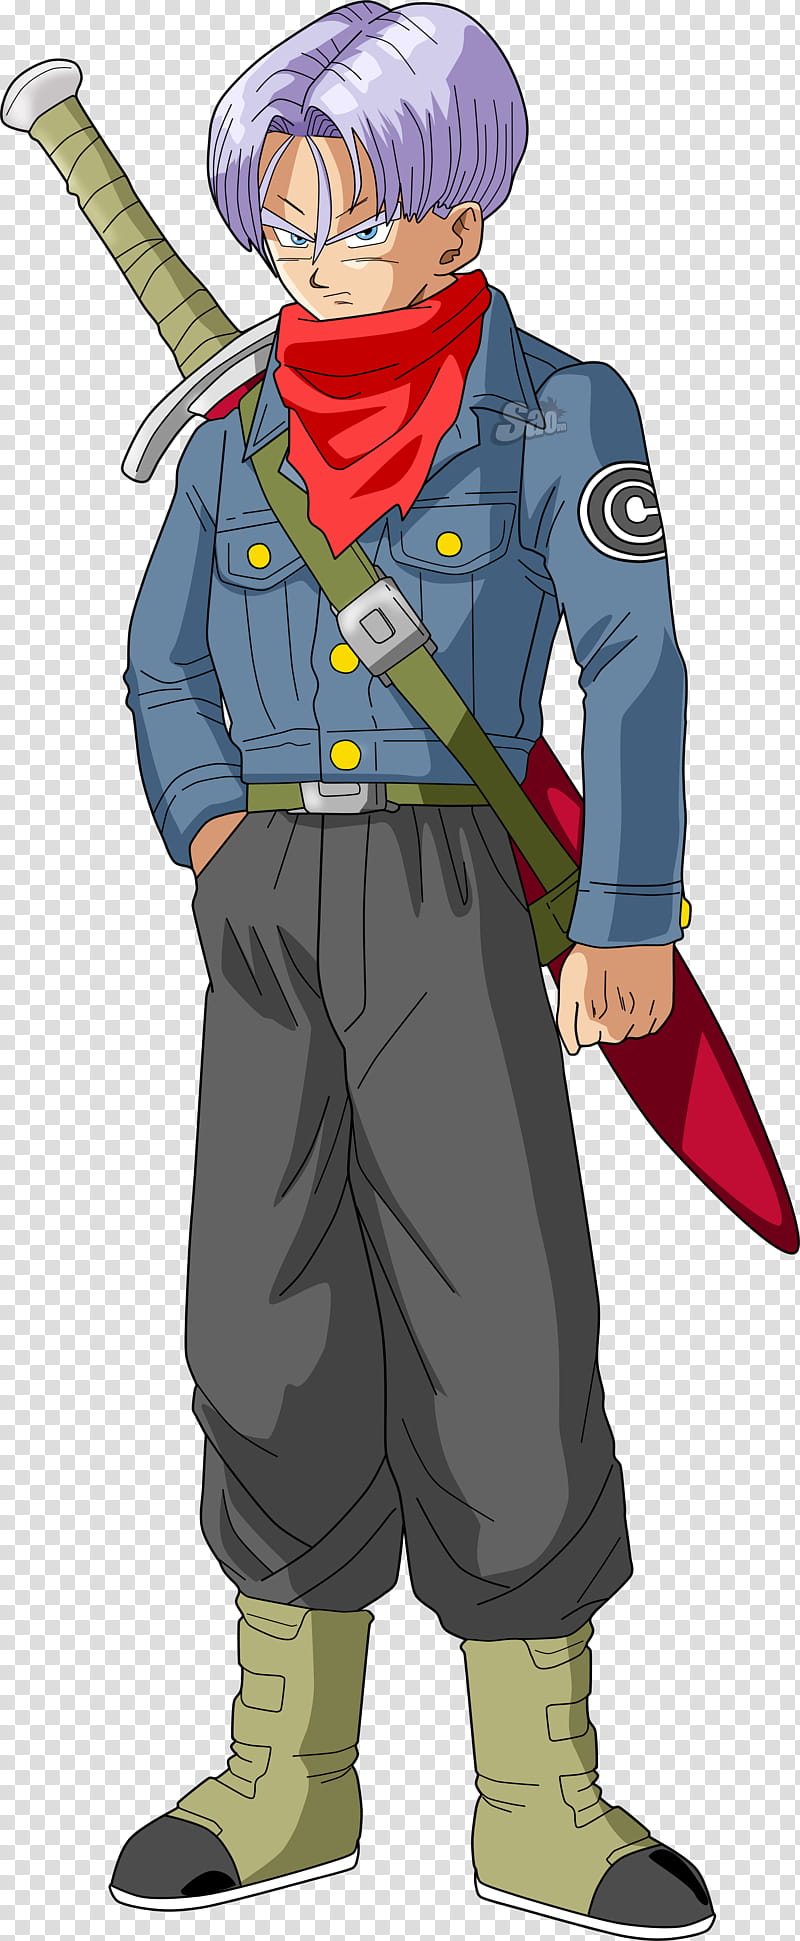 Mirai Trunks DBS, Dragon Ball Z Future Trunks with right hand in his pocket illustration transparent background PNG clipart